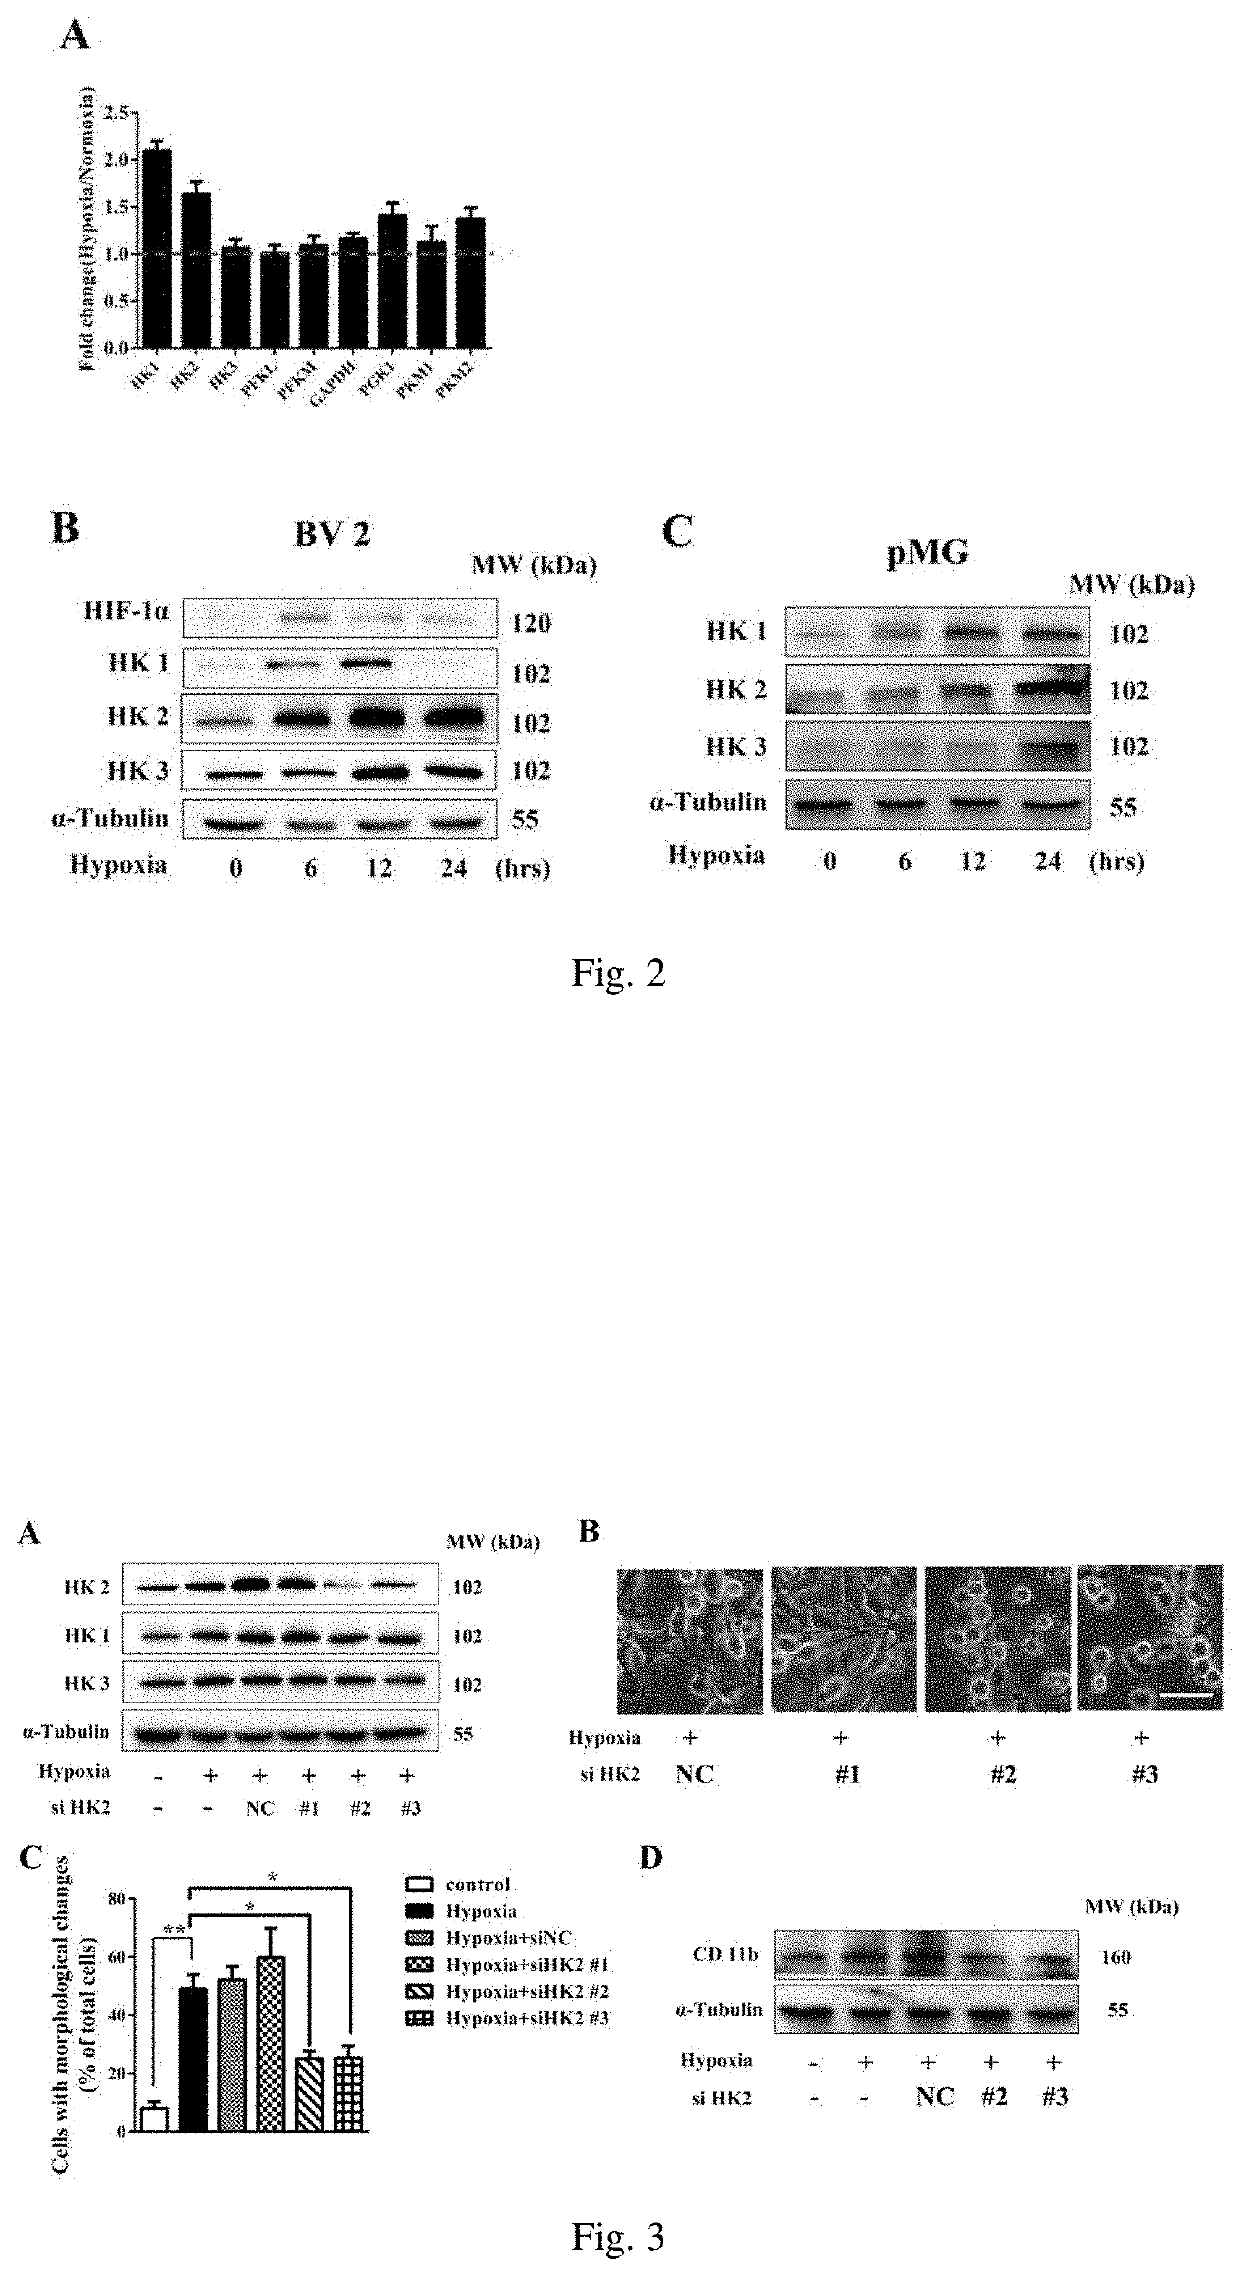 Hexokinase 2-specific inhibitor in acute central nervous system injury disease